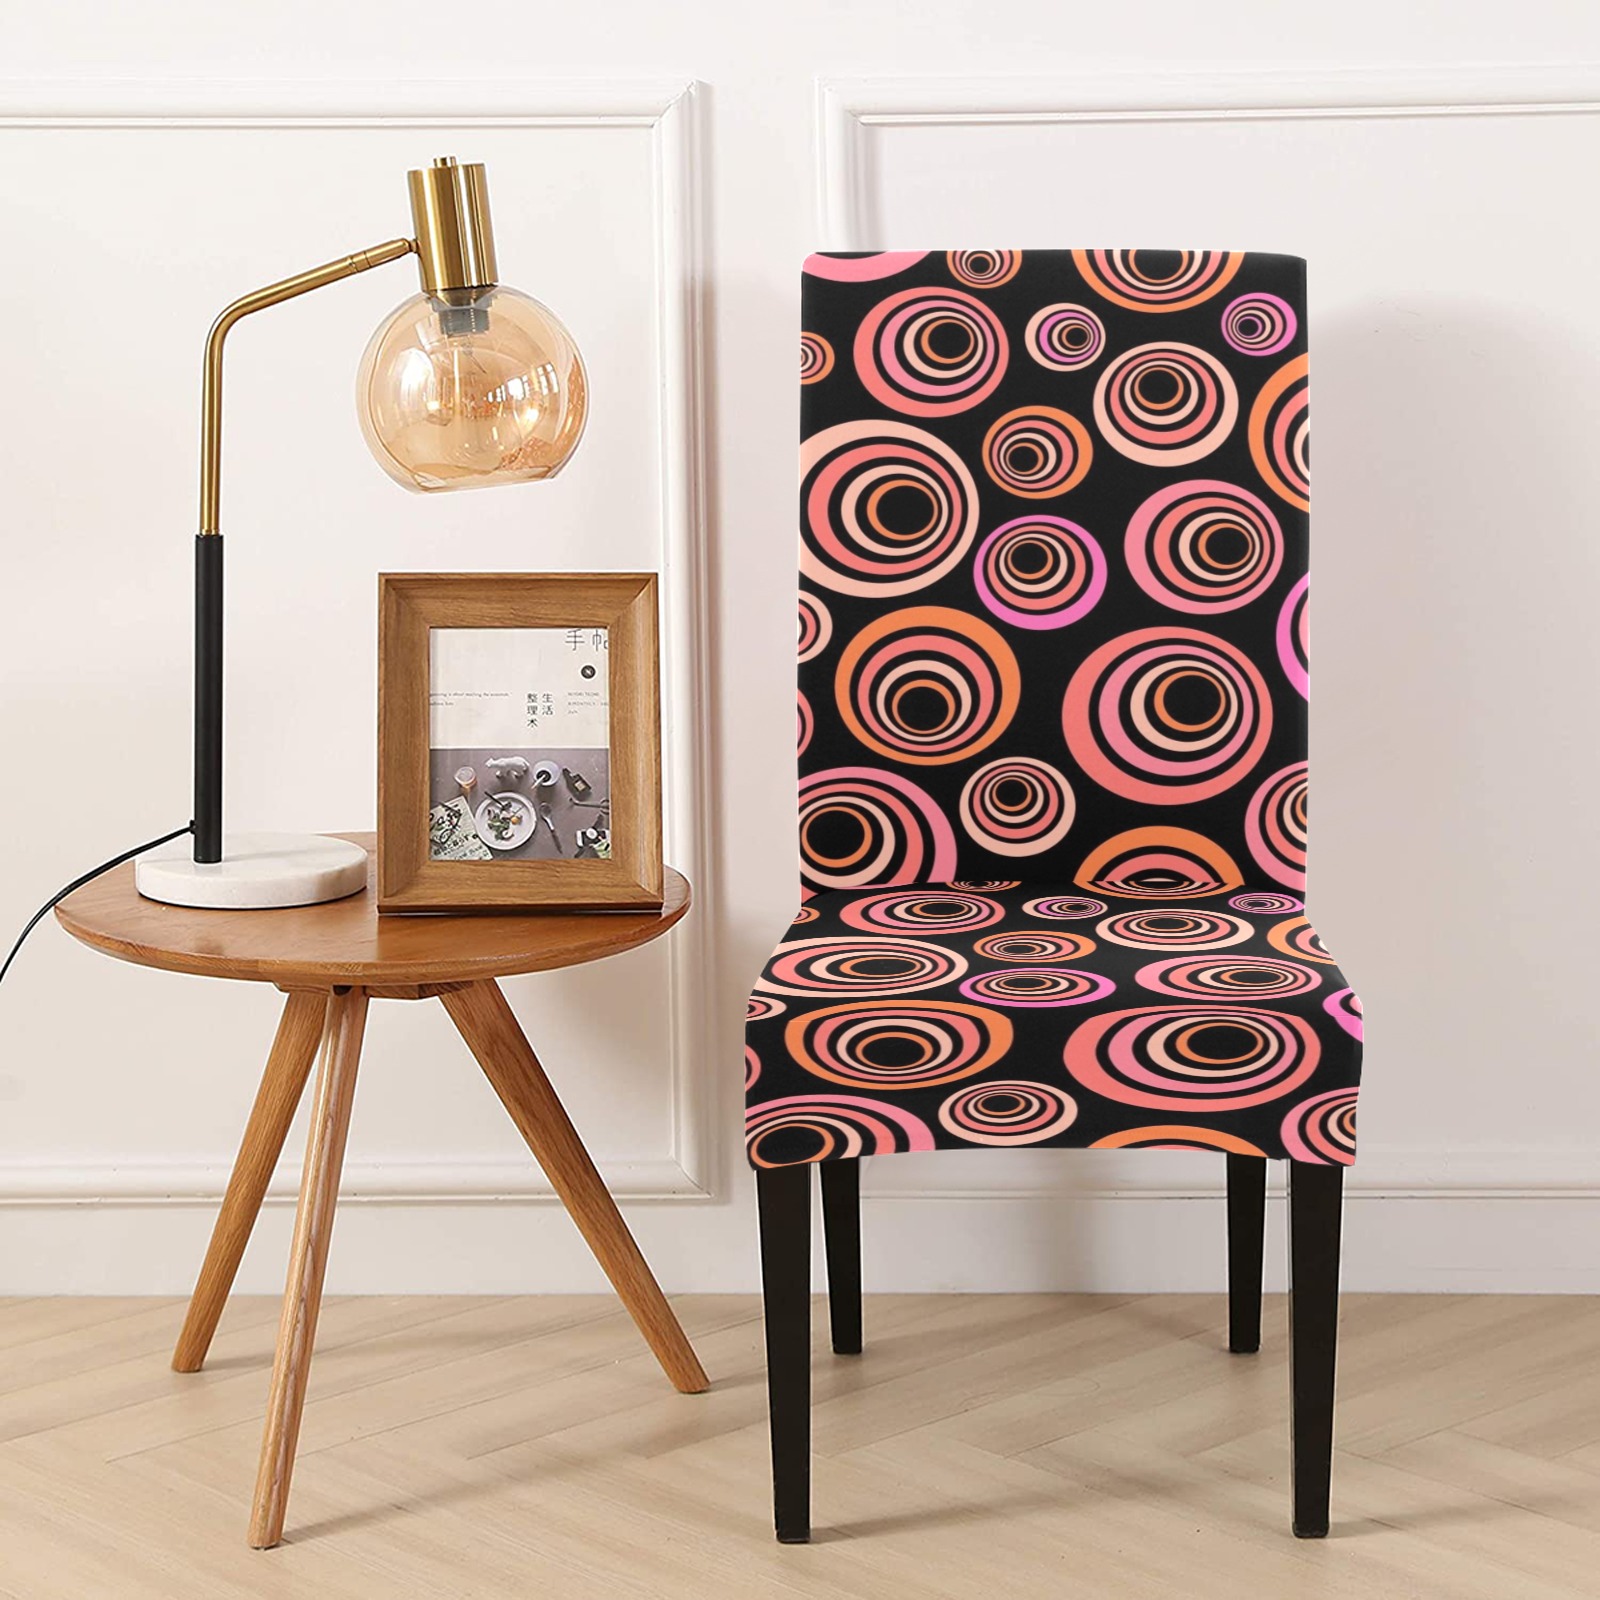 Retro Psychedelic Pretty Orange Pattern Removable Dining Chair Cover